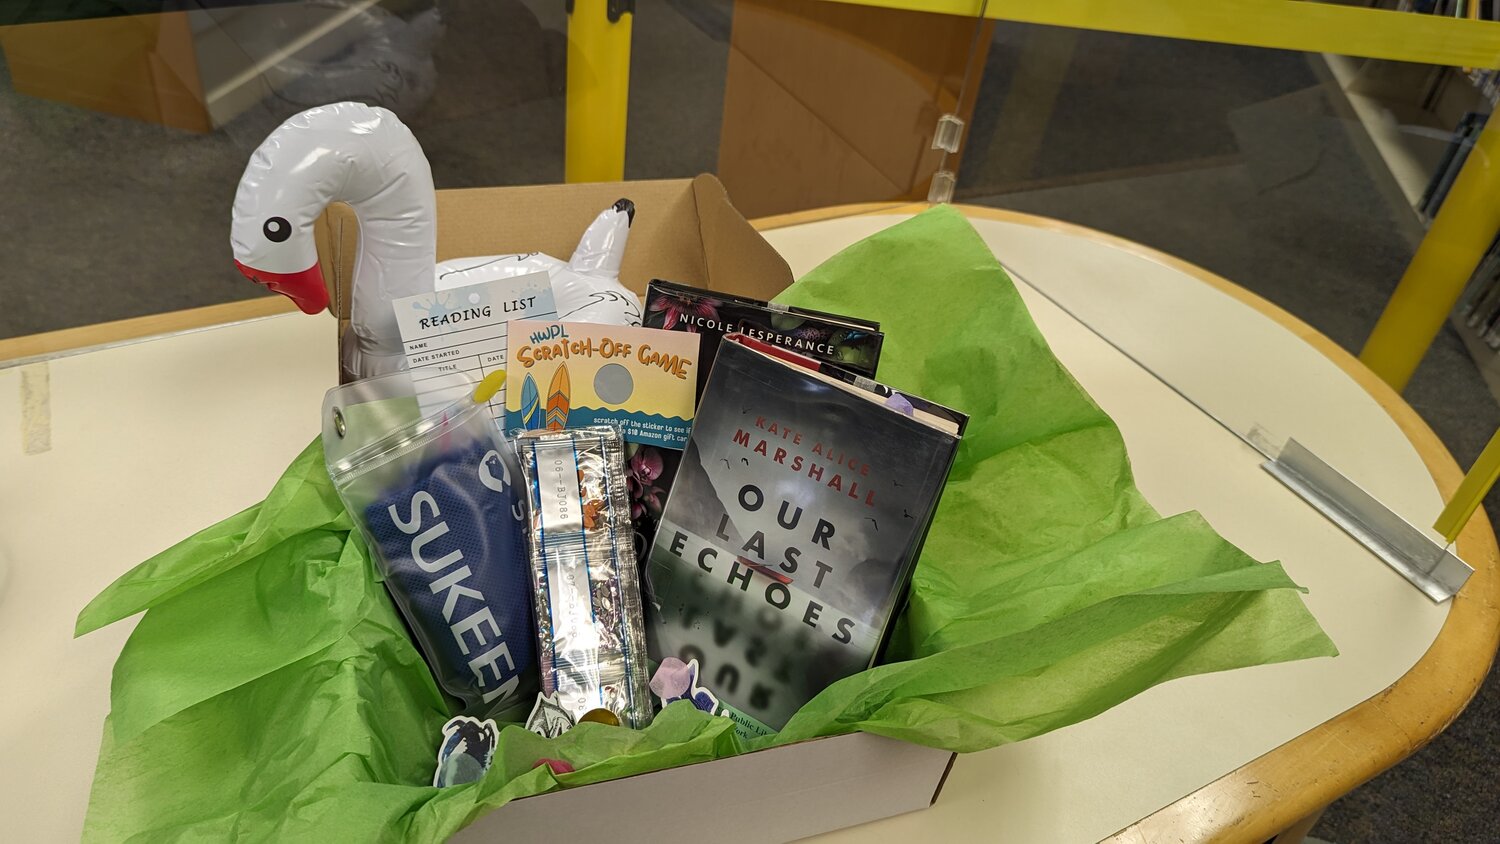 College-age students had the opportunity to participate in a survey this summer on the  Hewlett-Woodmere Public Library website to help them find two library books to read and receive free prizes.